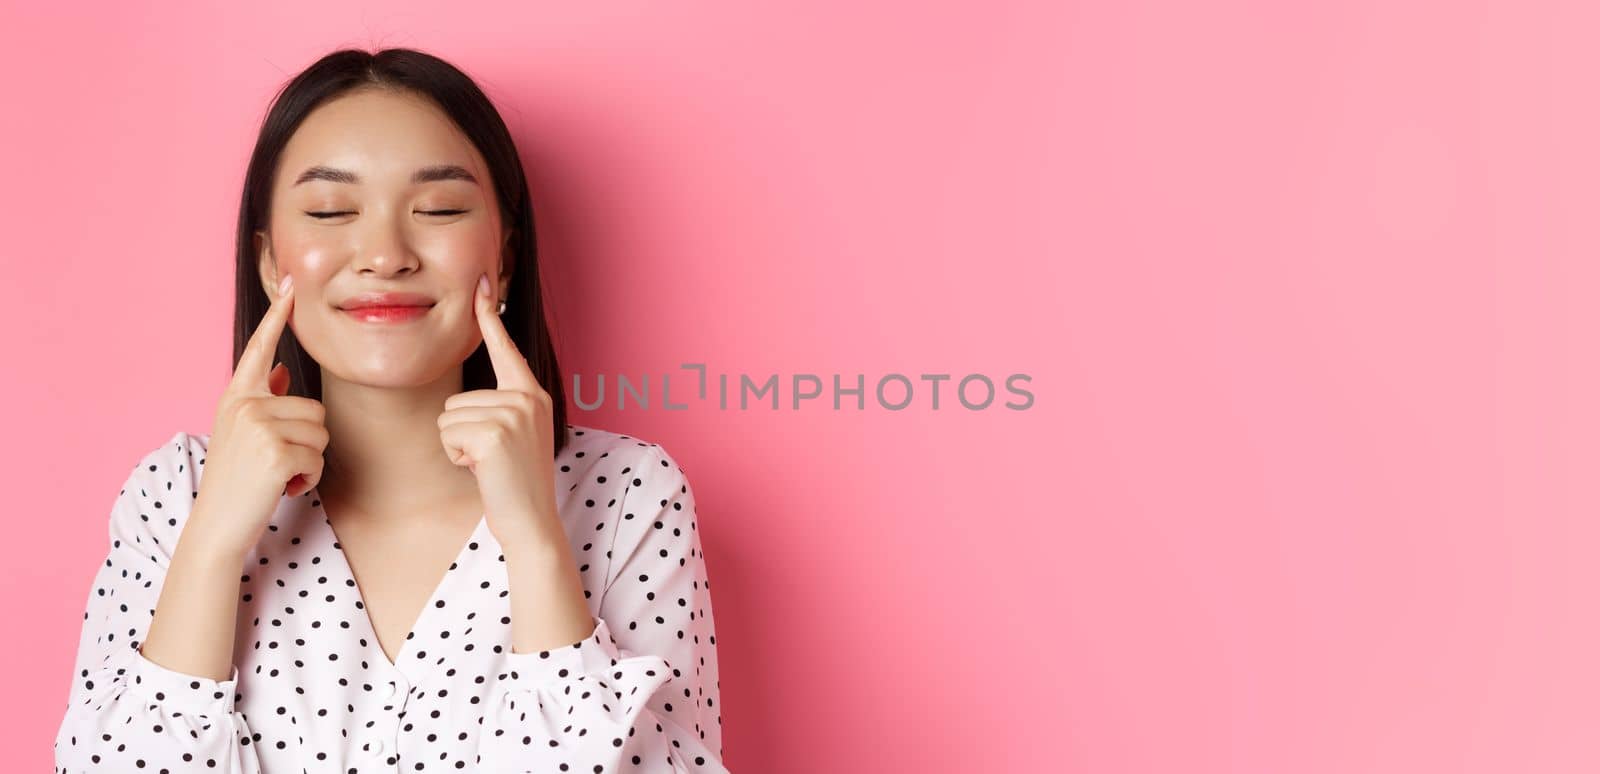 Beauty and lifestyle concept. Close-up of beautiful asian woman poking cheeks with closed eyes, smiling satisfied, standing over pink background.